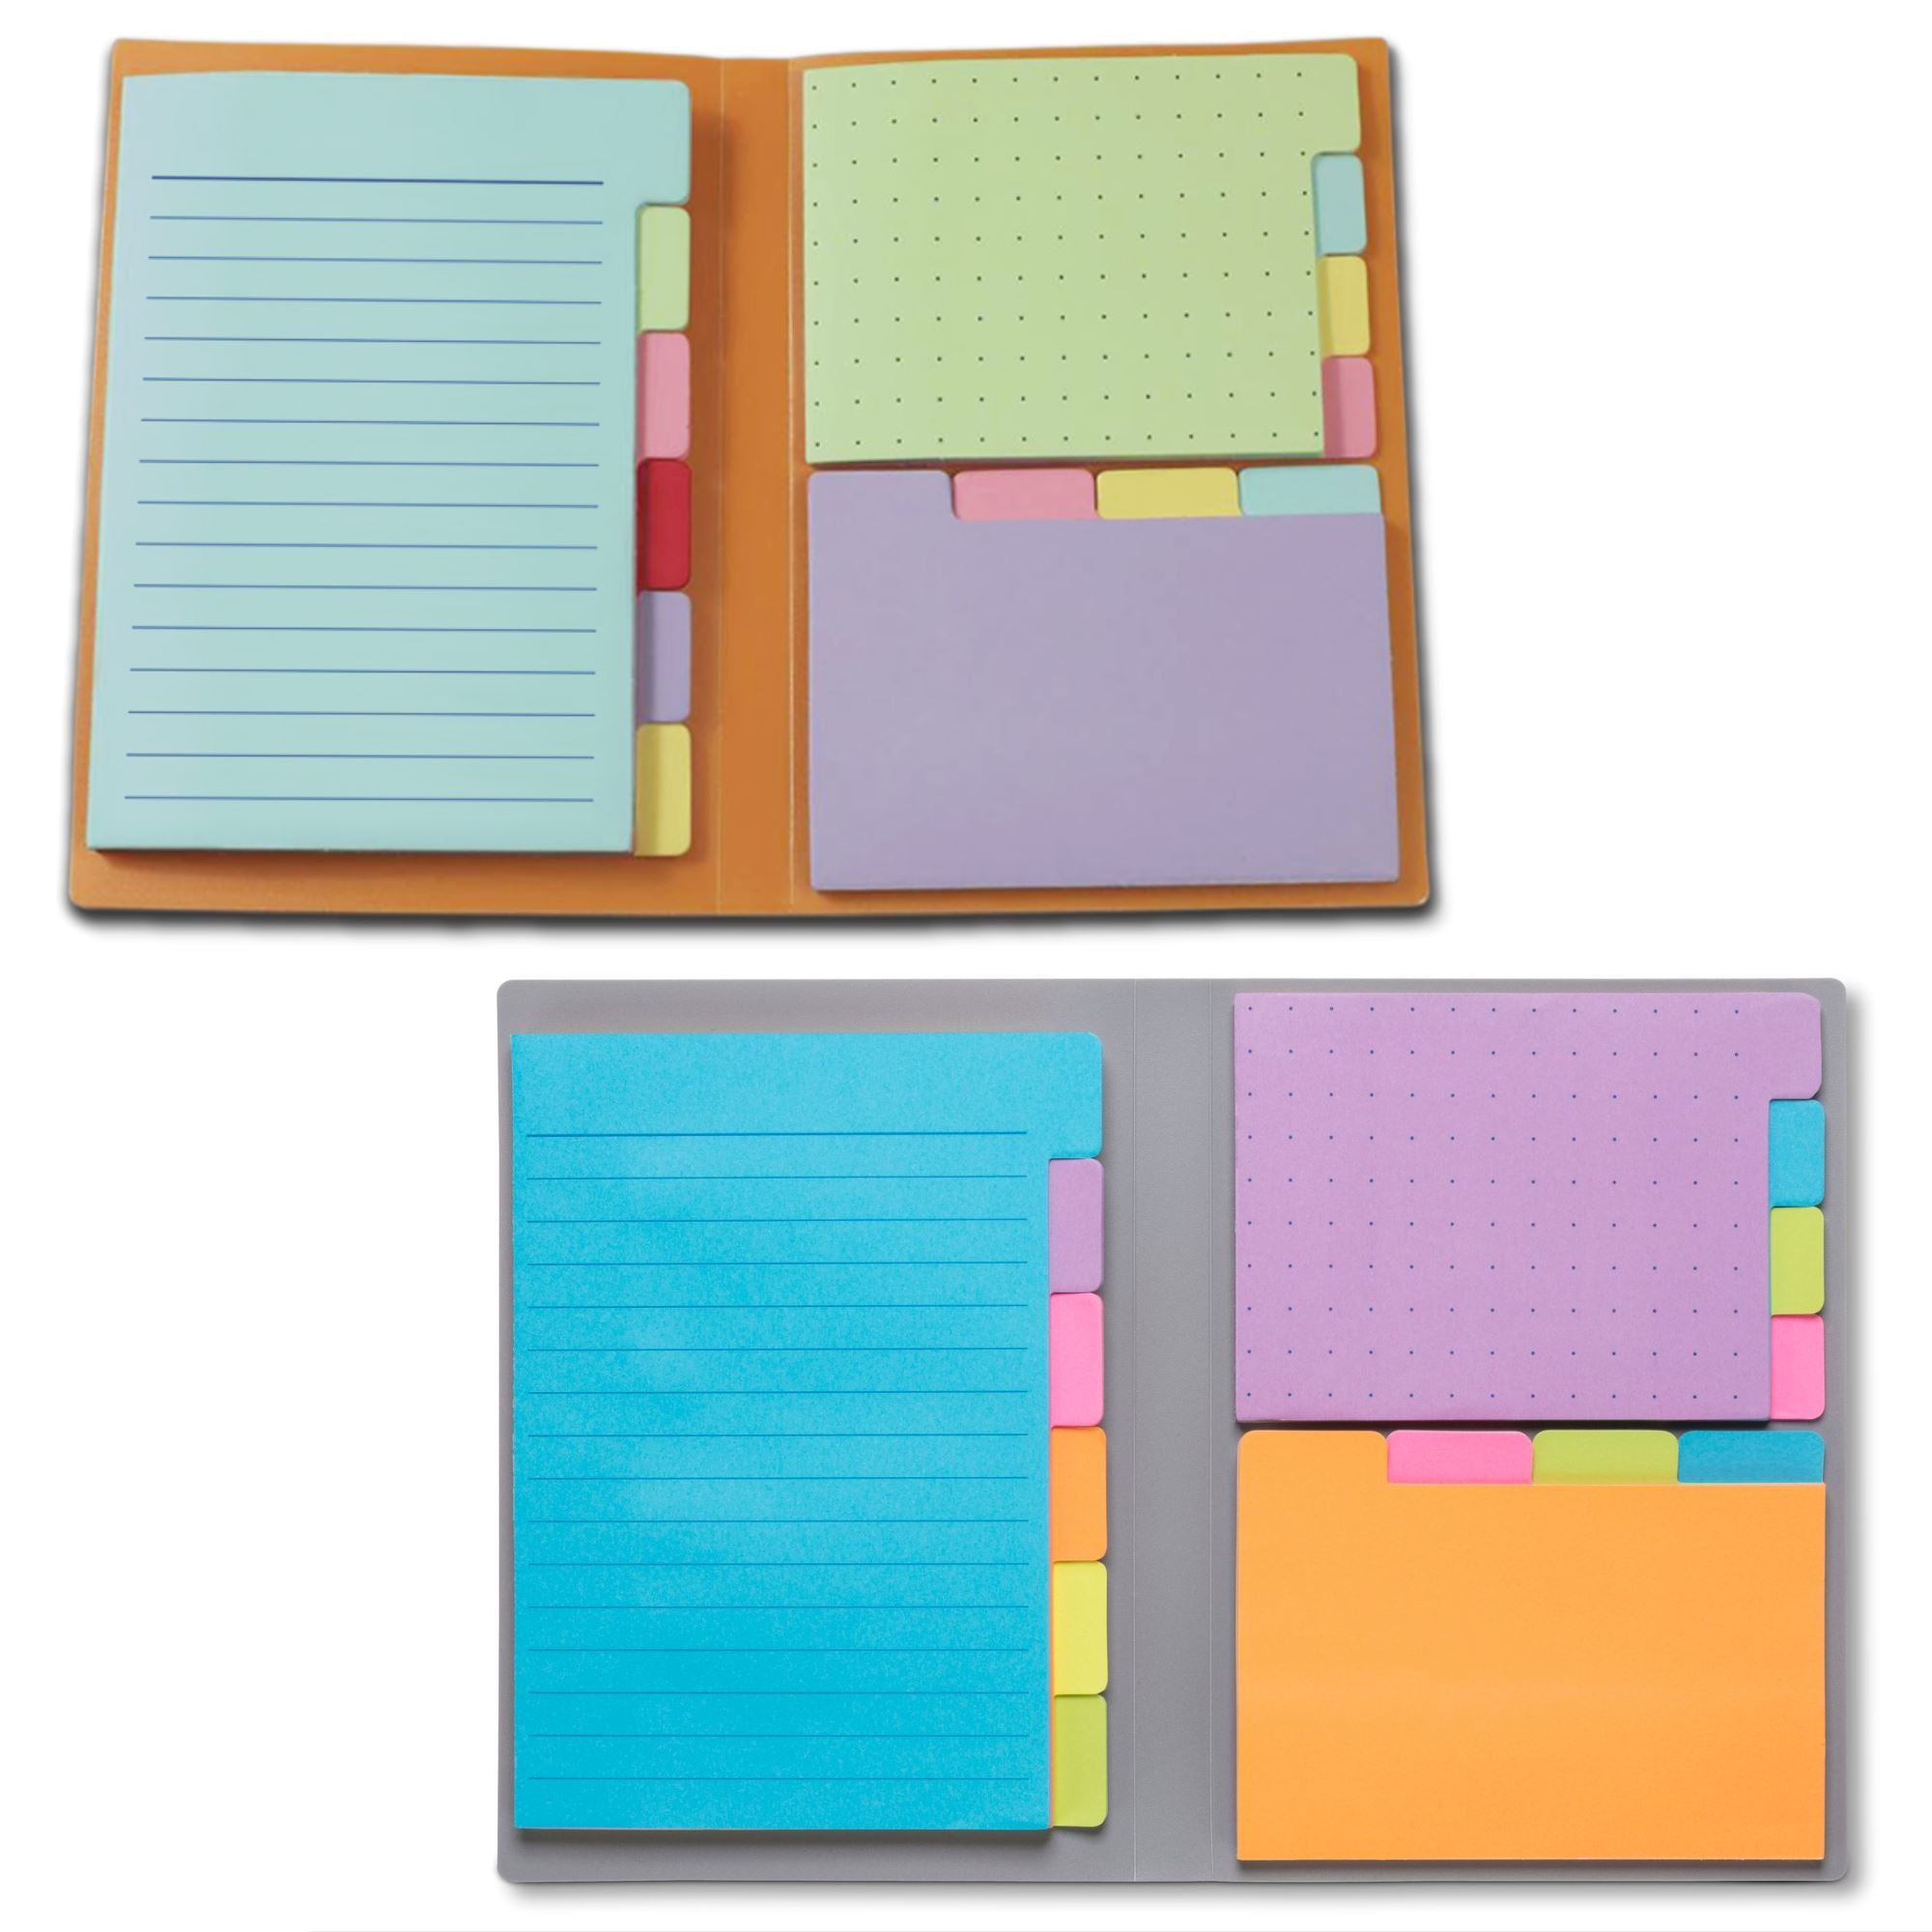 Panda Planner Sticky Notes - Versatile Note Planner with 140 Total